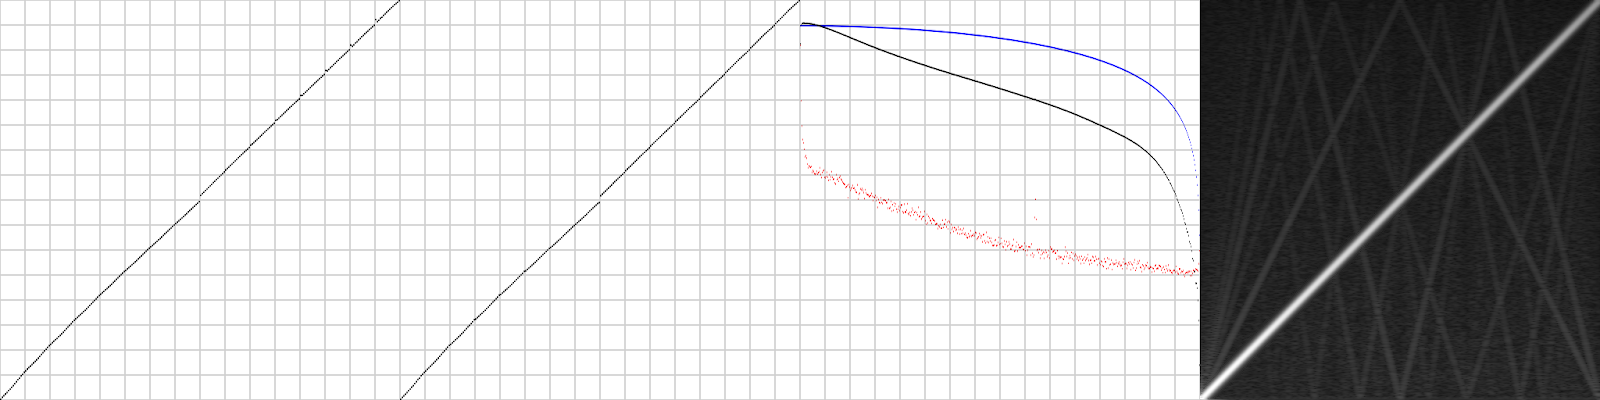 Four charts. The first two charts are mostly linear (x=y), aside from a small "fracture" in the middle. The third chart is a blue curve (going downwards near the right), a black curve (slanted slightly downwards, with also the sudden fall near the right) and a noisy red curve below. The last chart is a line going from bottom left to top right, with very faint lines behind it (representing harmonics... hard to explain in text alone, at least I tried).